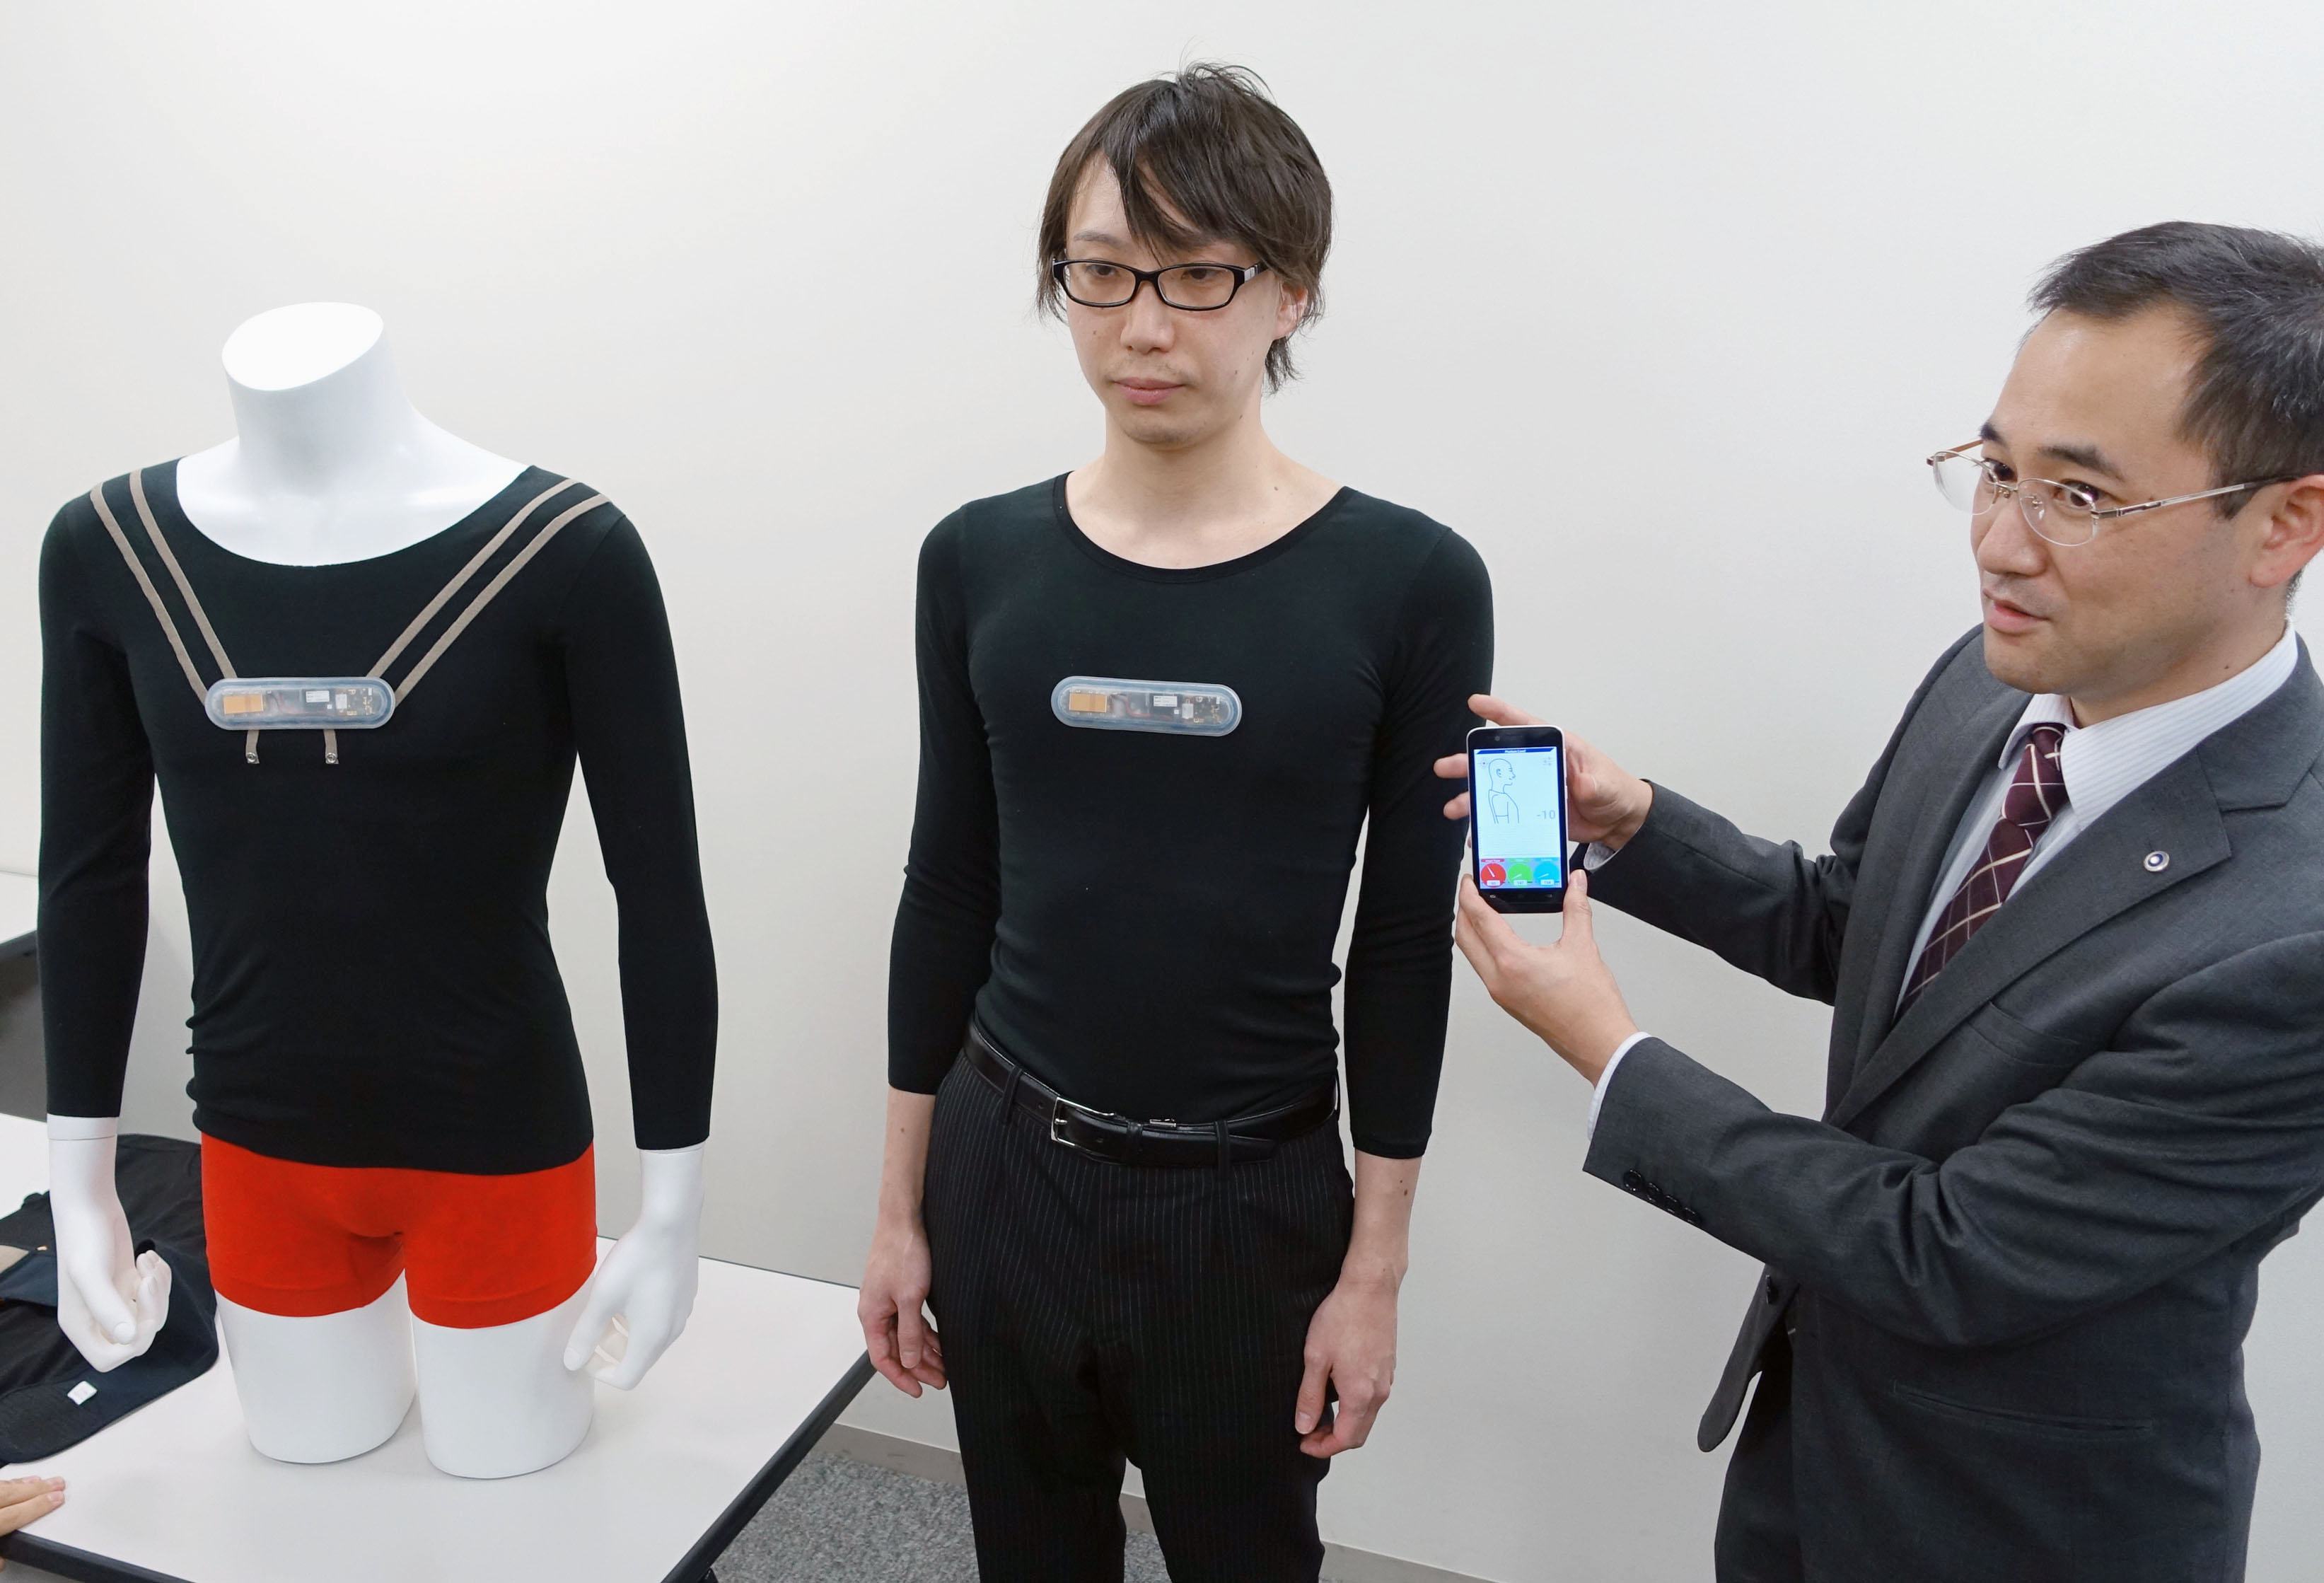 Smart underwear that measures health data developed - The Japan Times